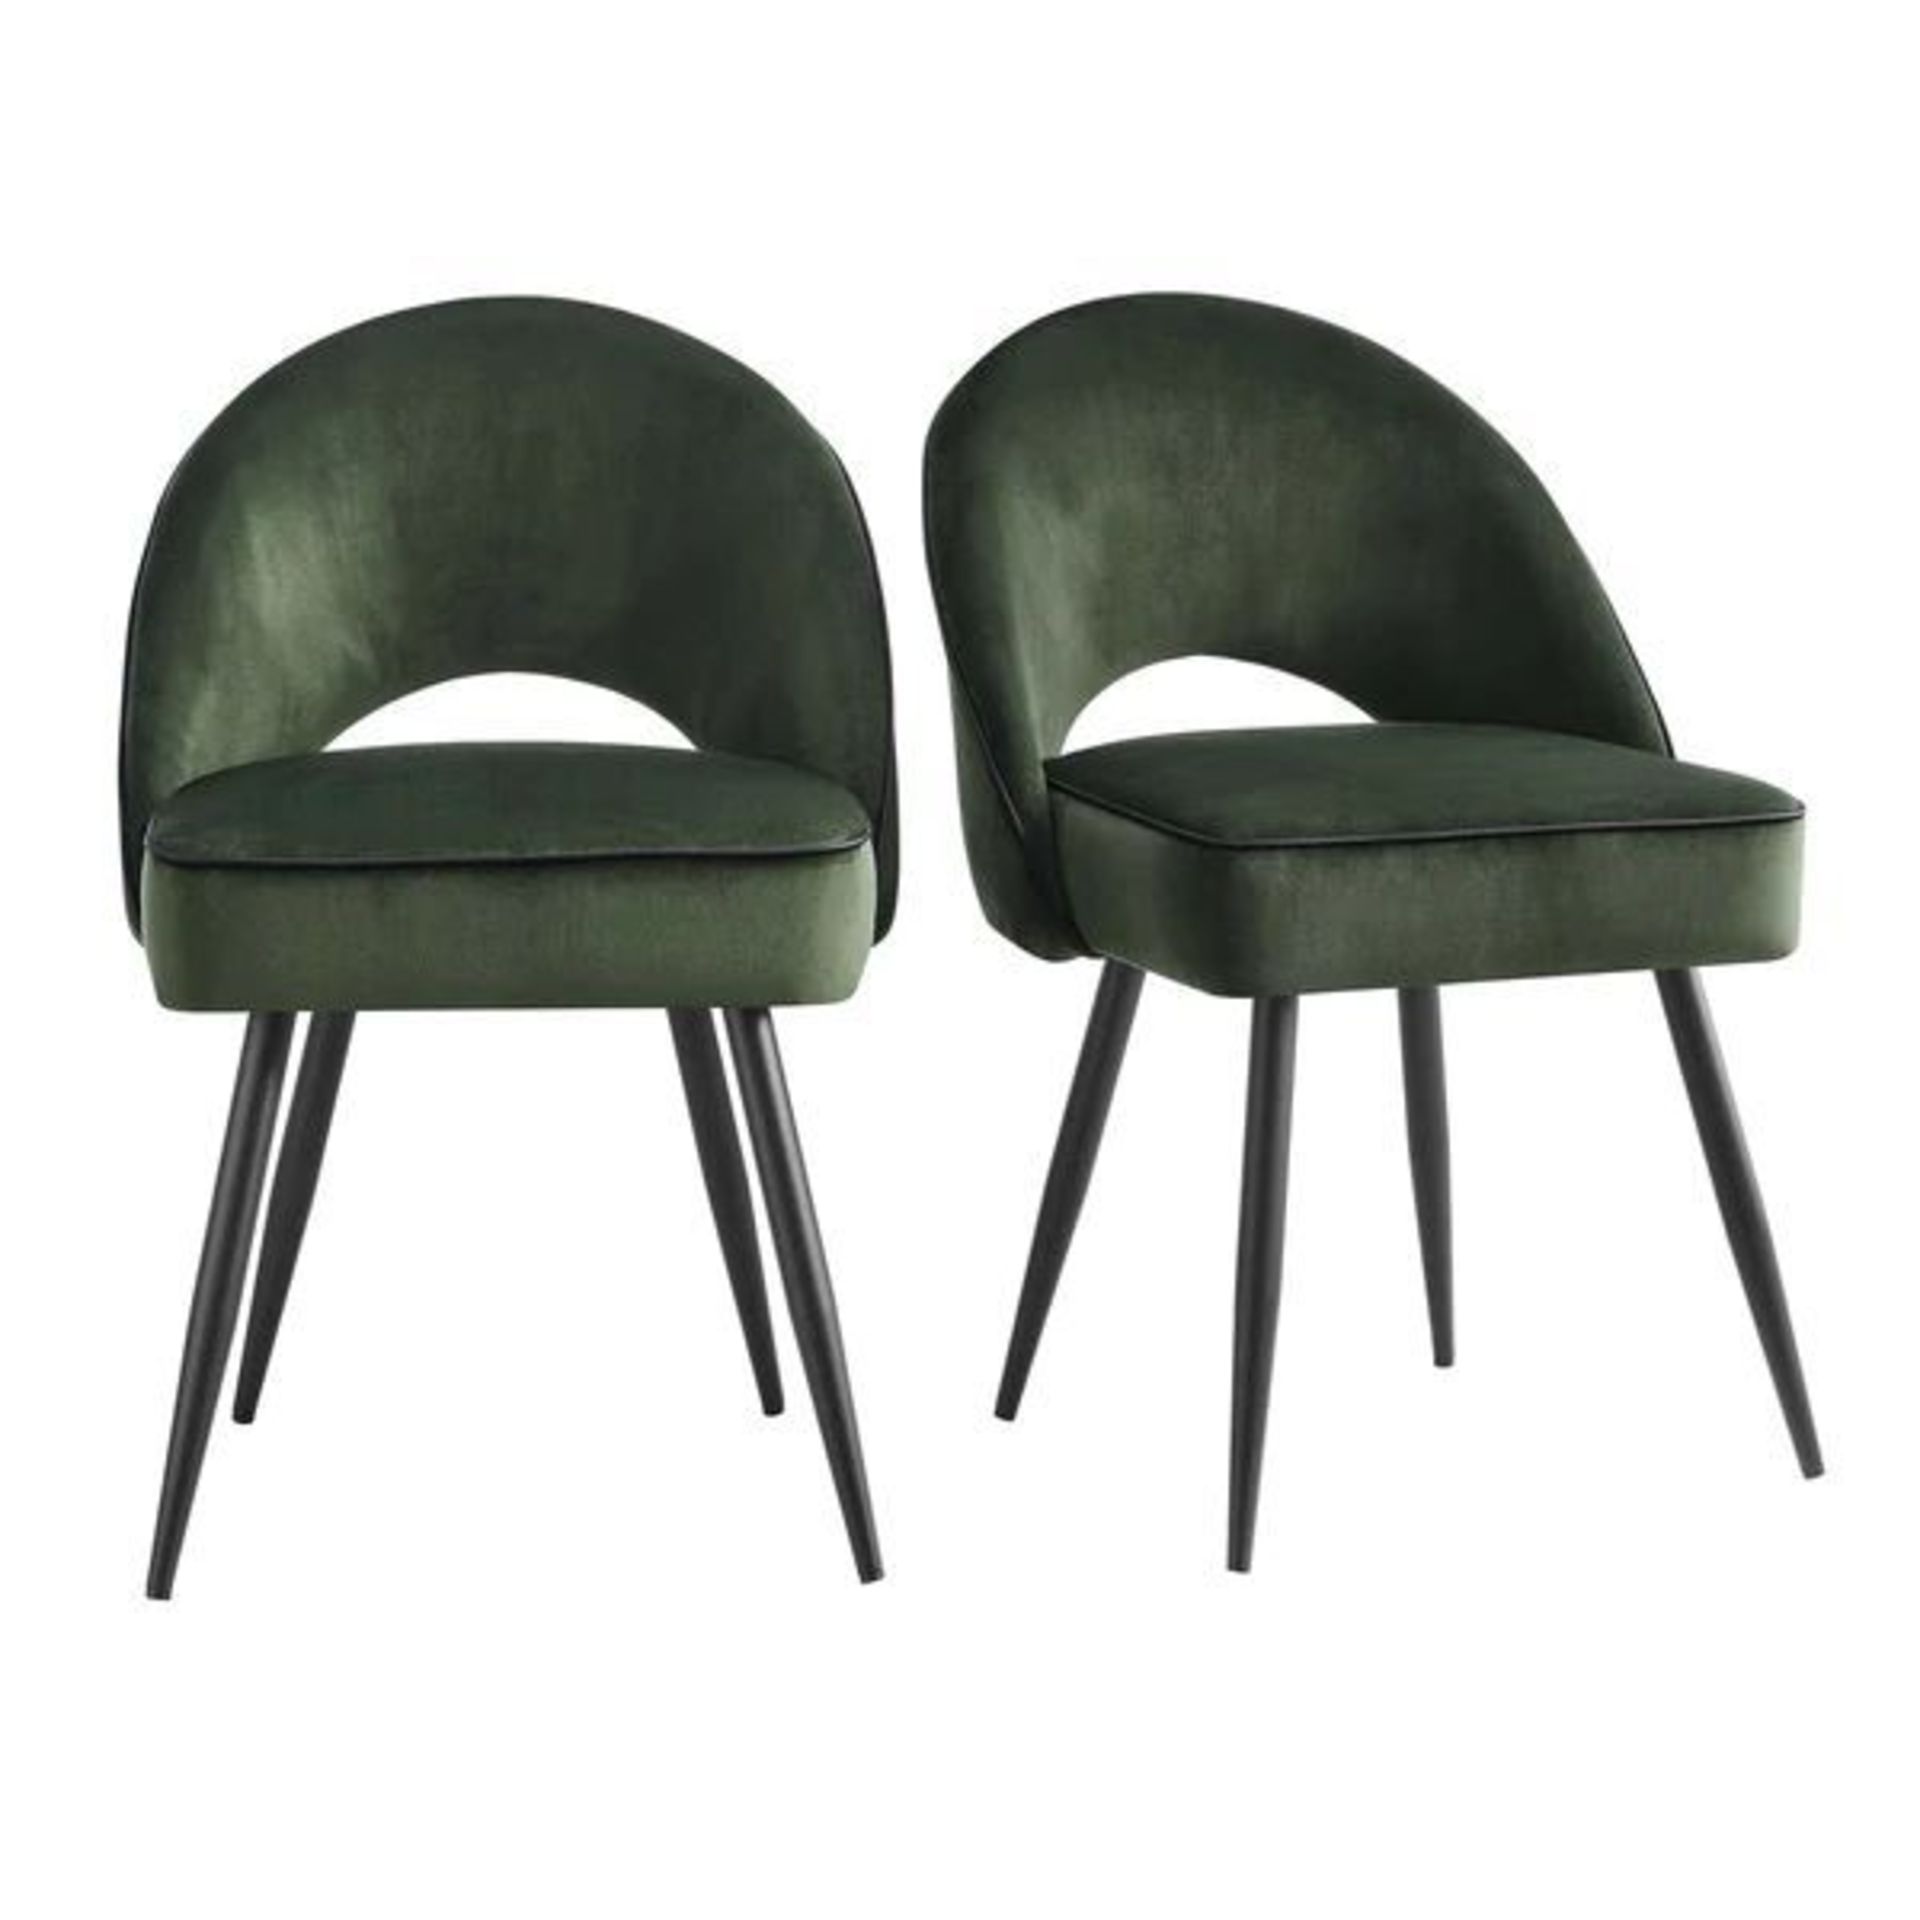 Oakley Set of 2 Dark Green Velvet Upholstered Dining Chairs with Contrast Piping. - ER29. RRP £289. - Image 4 of 4